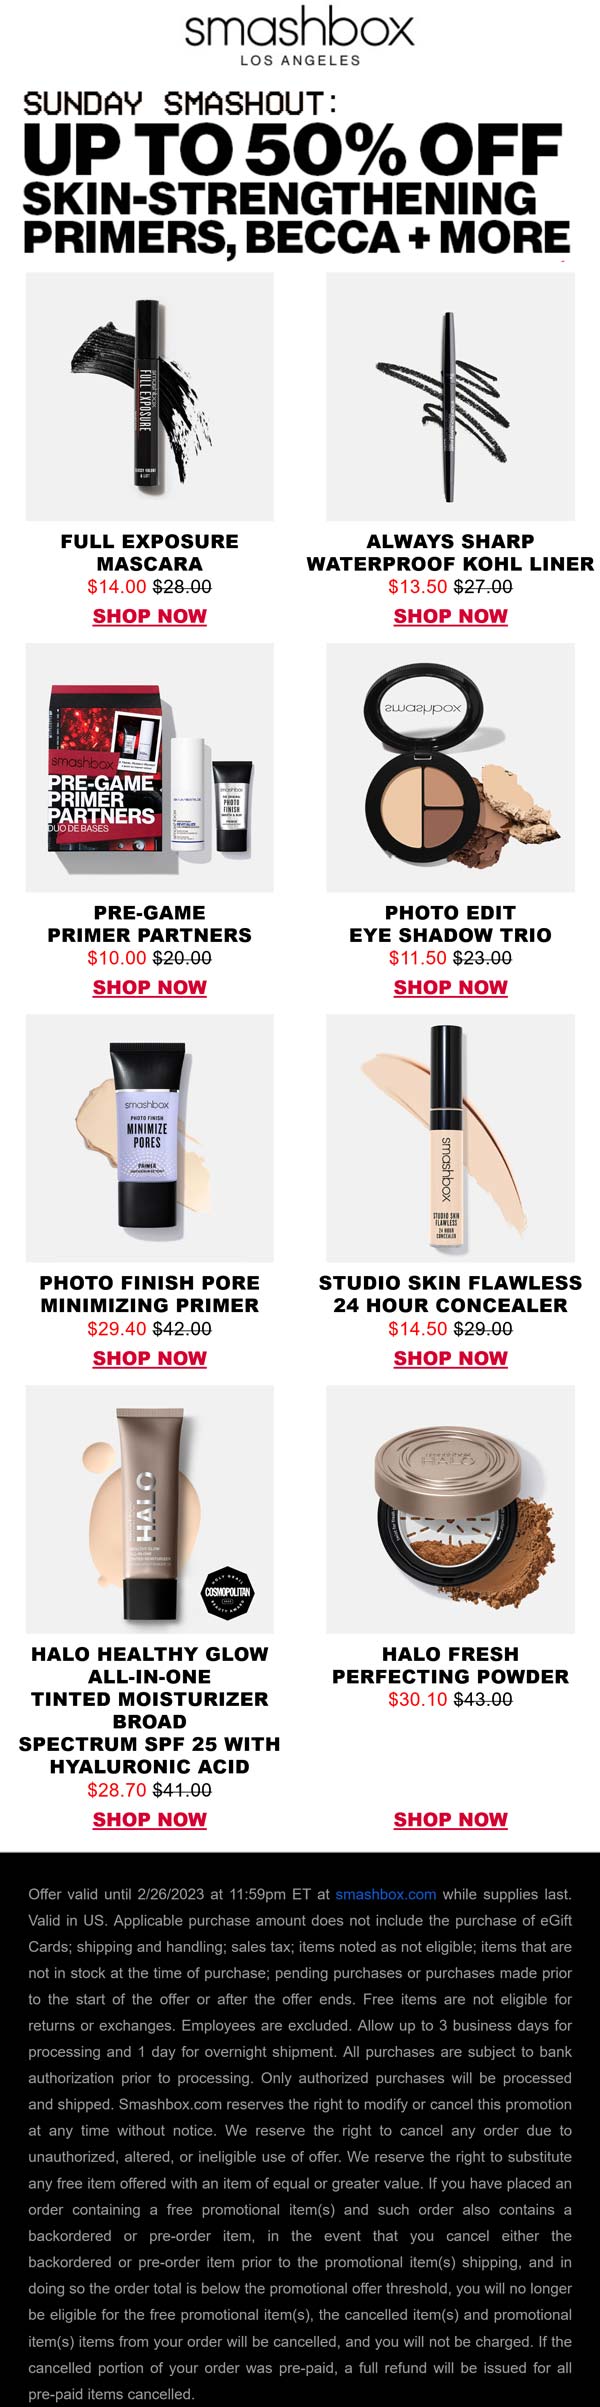 Smashbox stores Coupon  Various primers, becca & more are 50% off at Smashbox Cosmetics #smashbox 